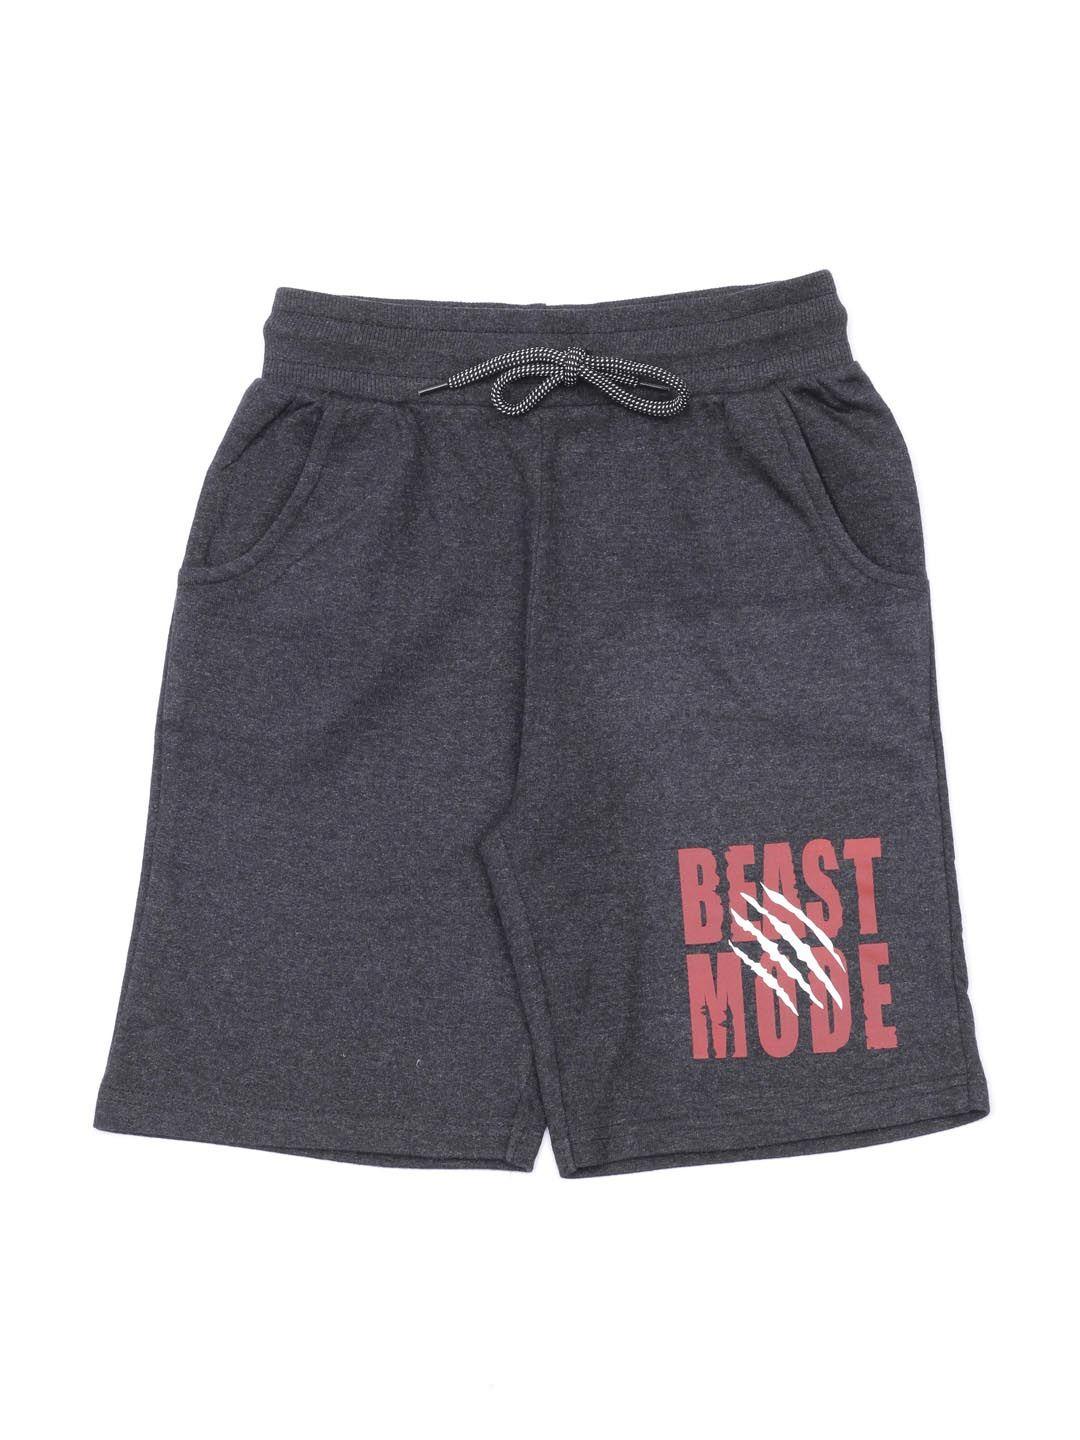 lil lollipop kids charcoal grey & red typography printed pure cotton shorts